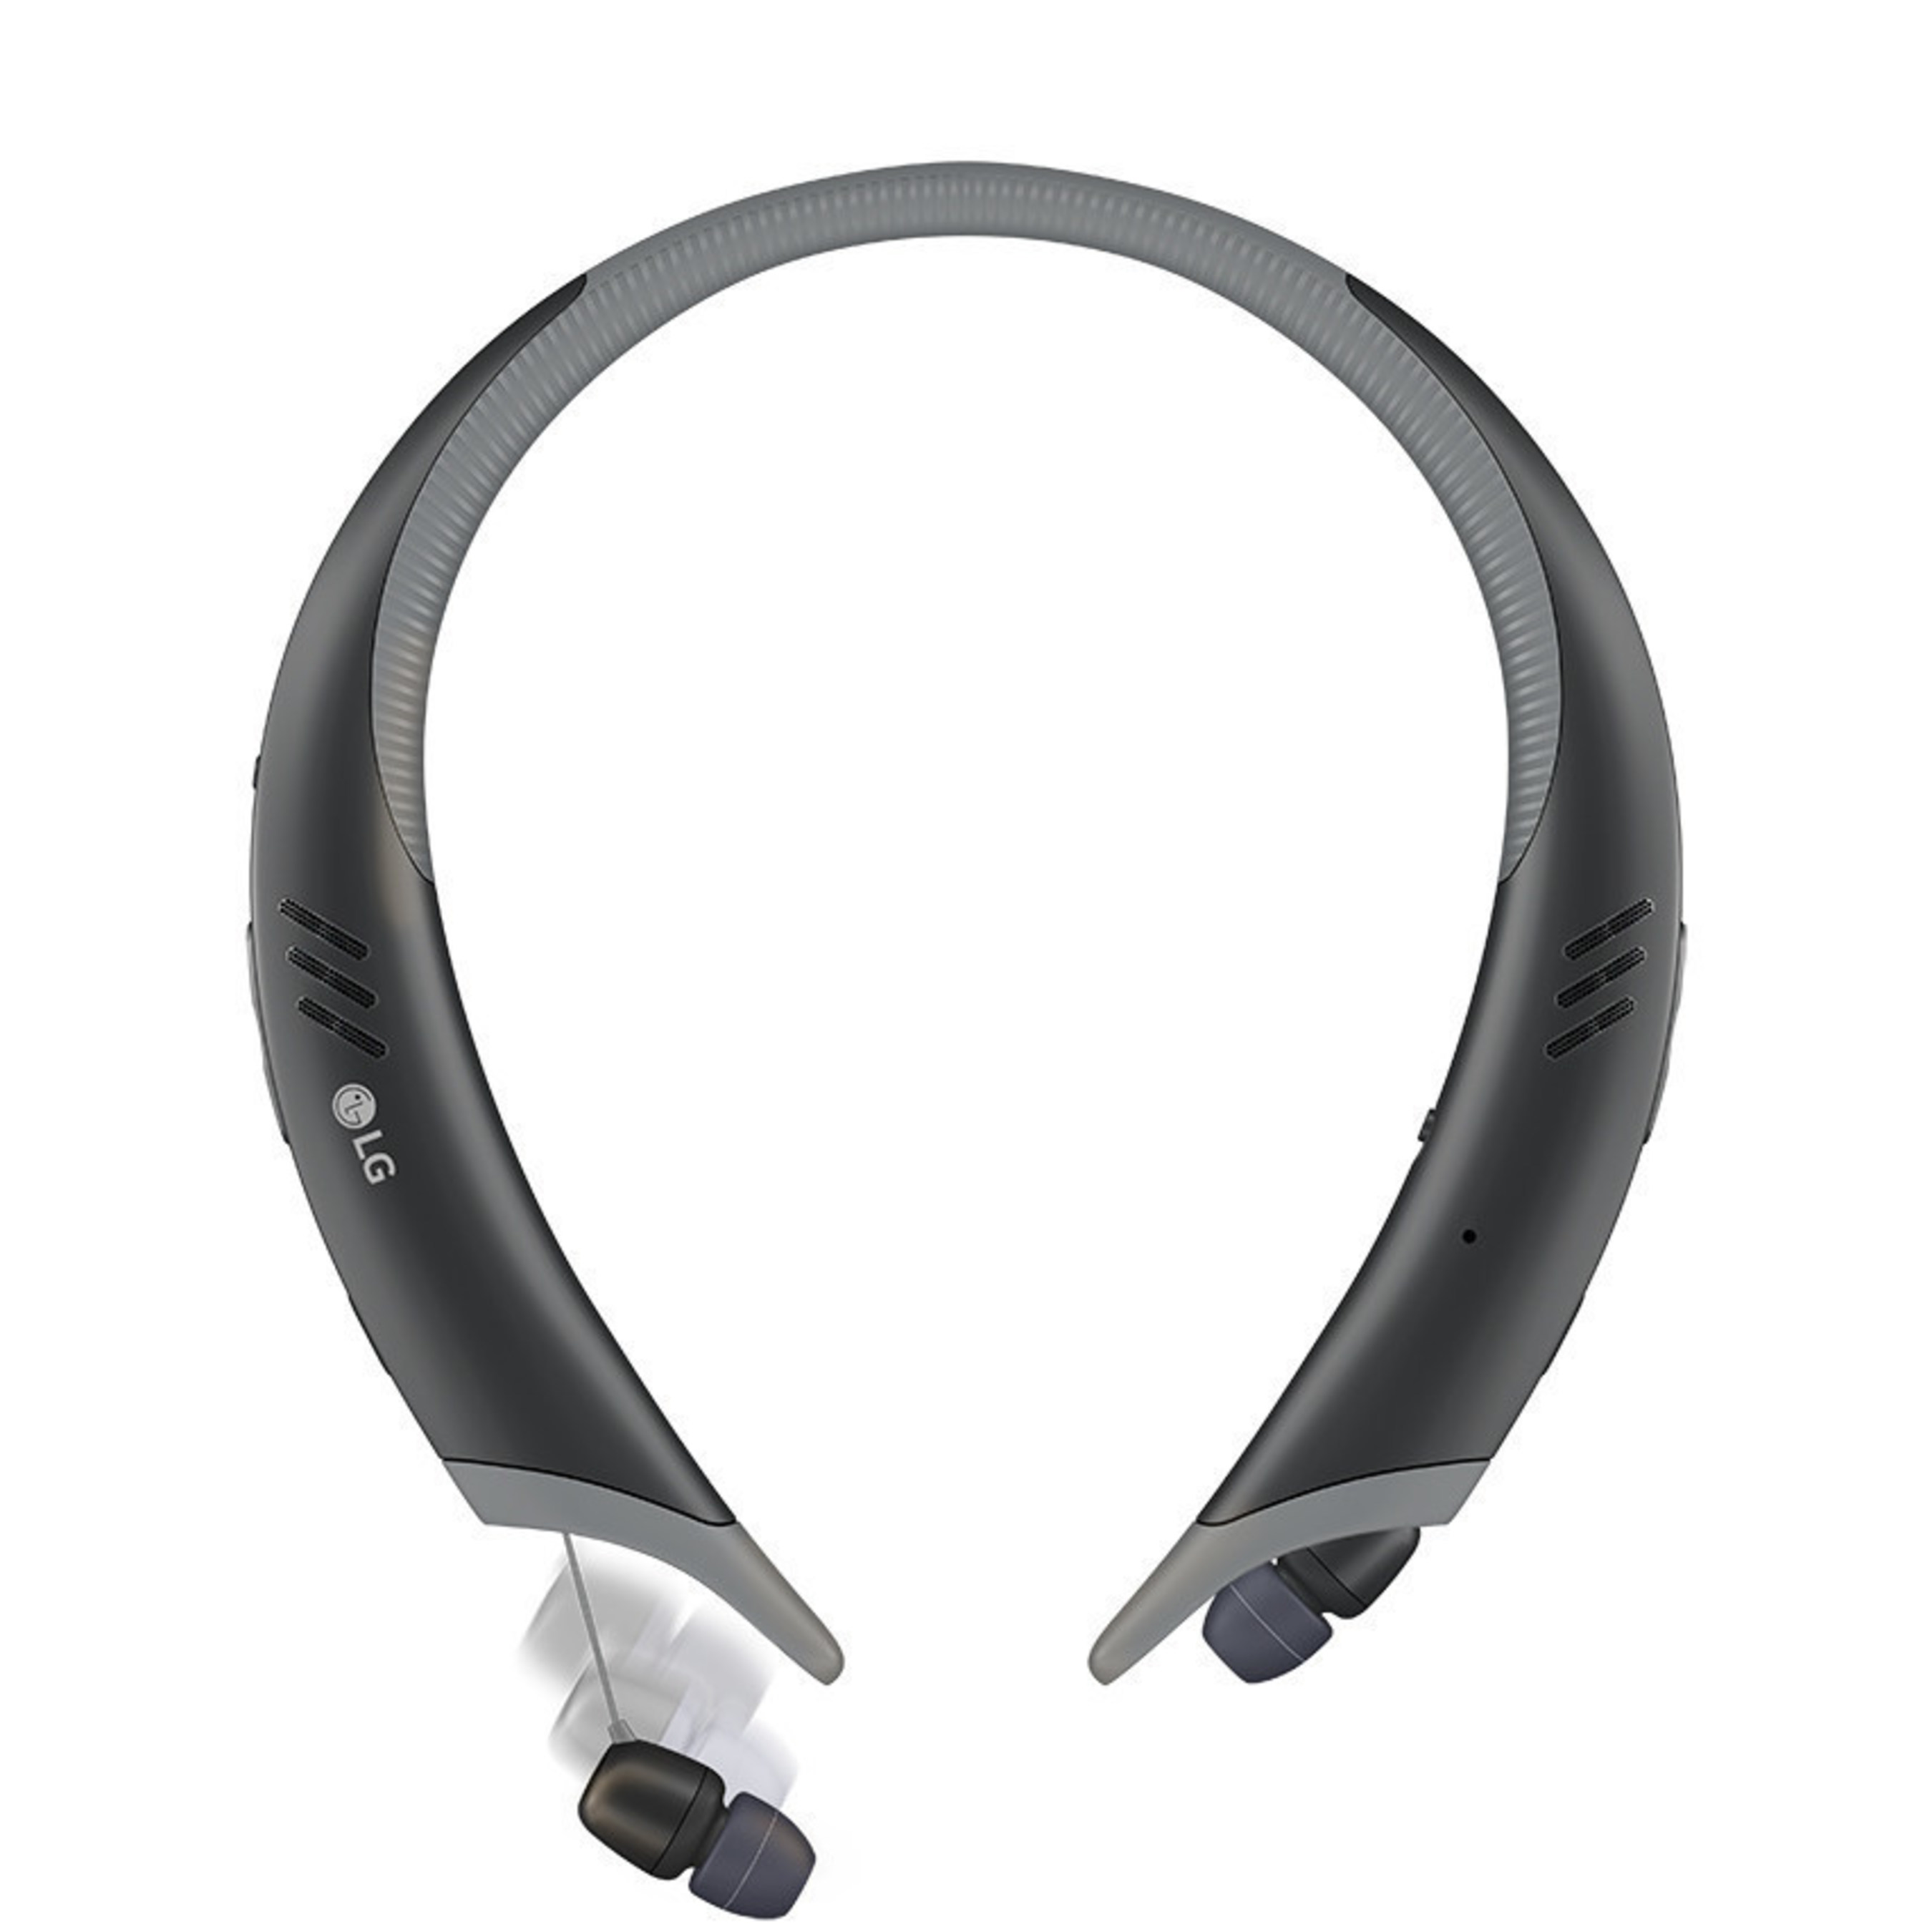 Not only does the LG TONE Active+ headset come with built-in external stereo speakers that amps up the bass in your playlist, this sleek Bluetooth(R) headset is designed to stay put during your workout to ensure you don't miss a beat, whether lifting weights in a sweat induced session or running the last mile of a 5K in the rain.